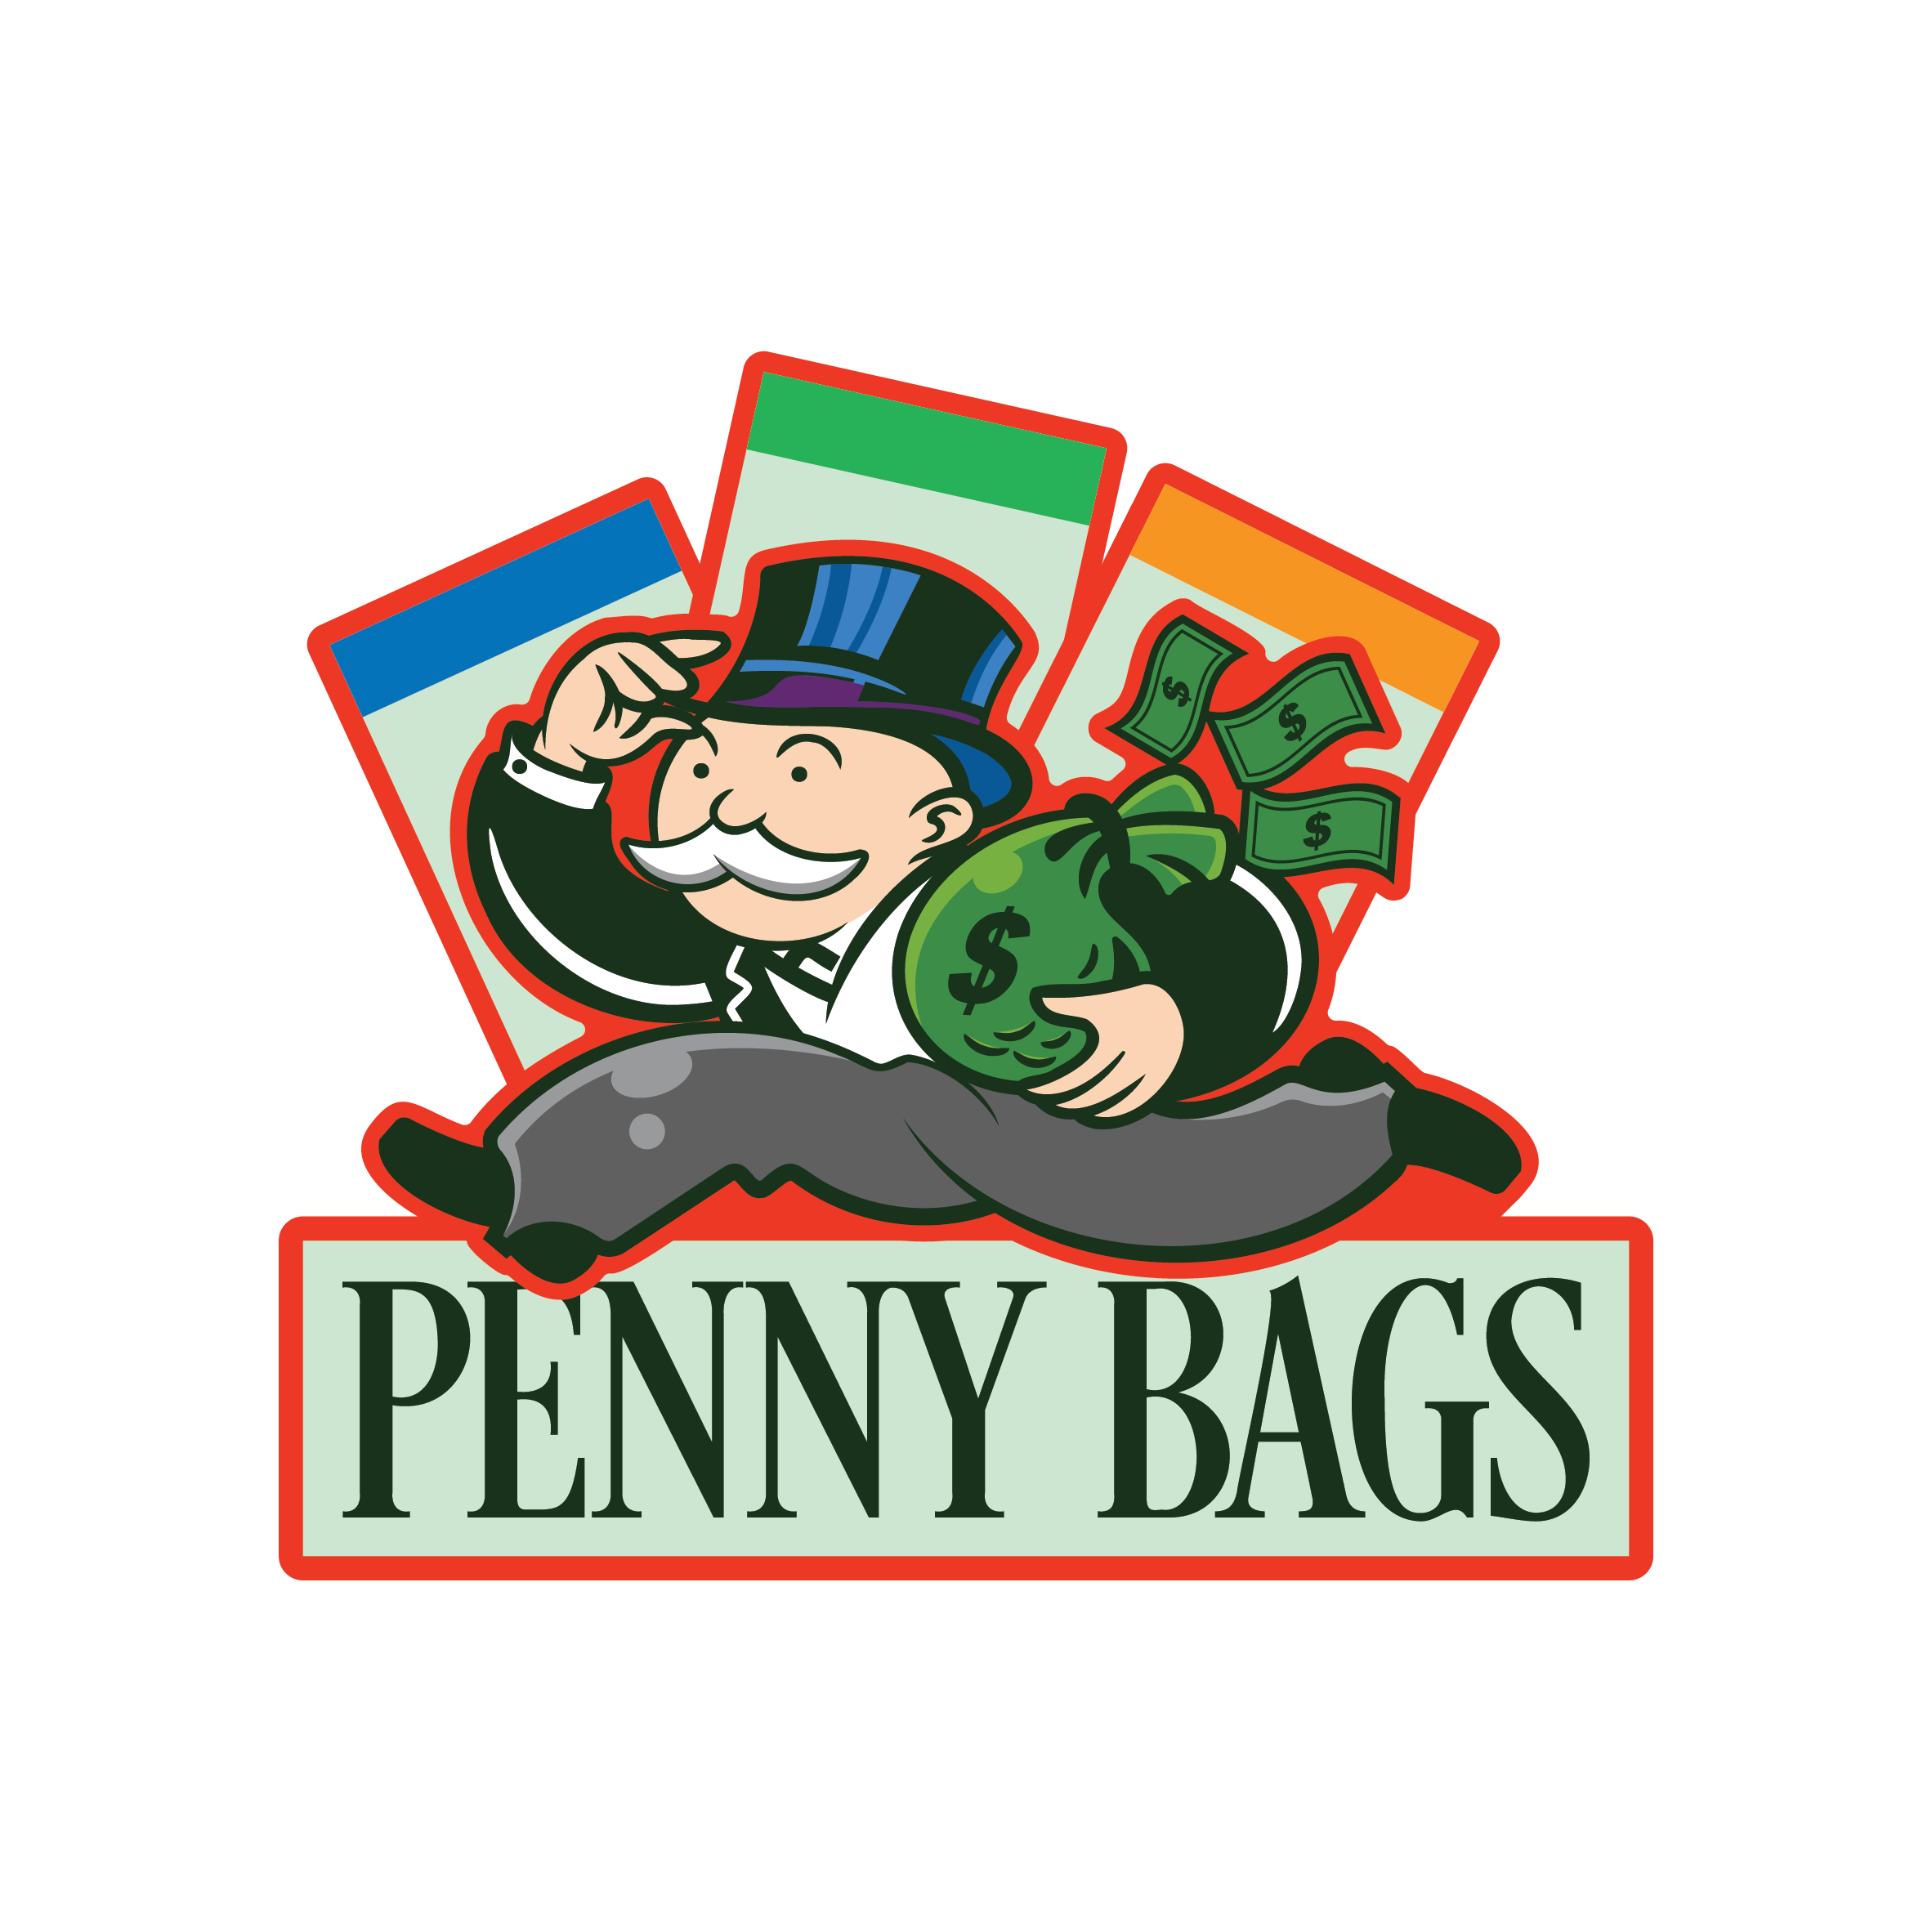 Penny Bags logo design by logo designer Tortoiseshell Black for your inspiration and for the worlds largest logo competition